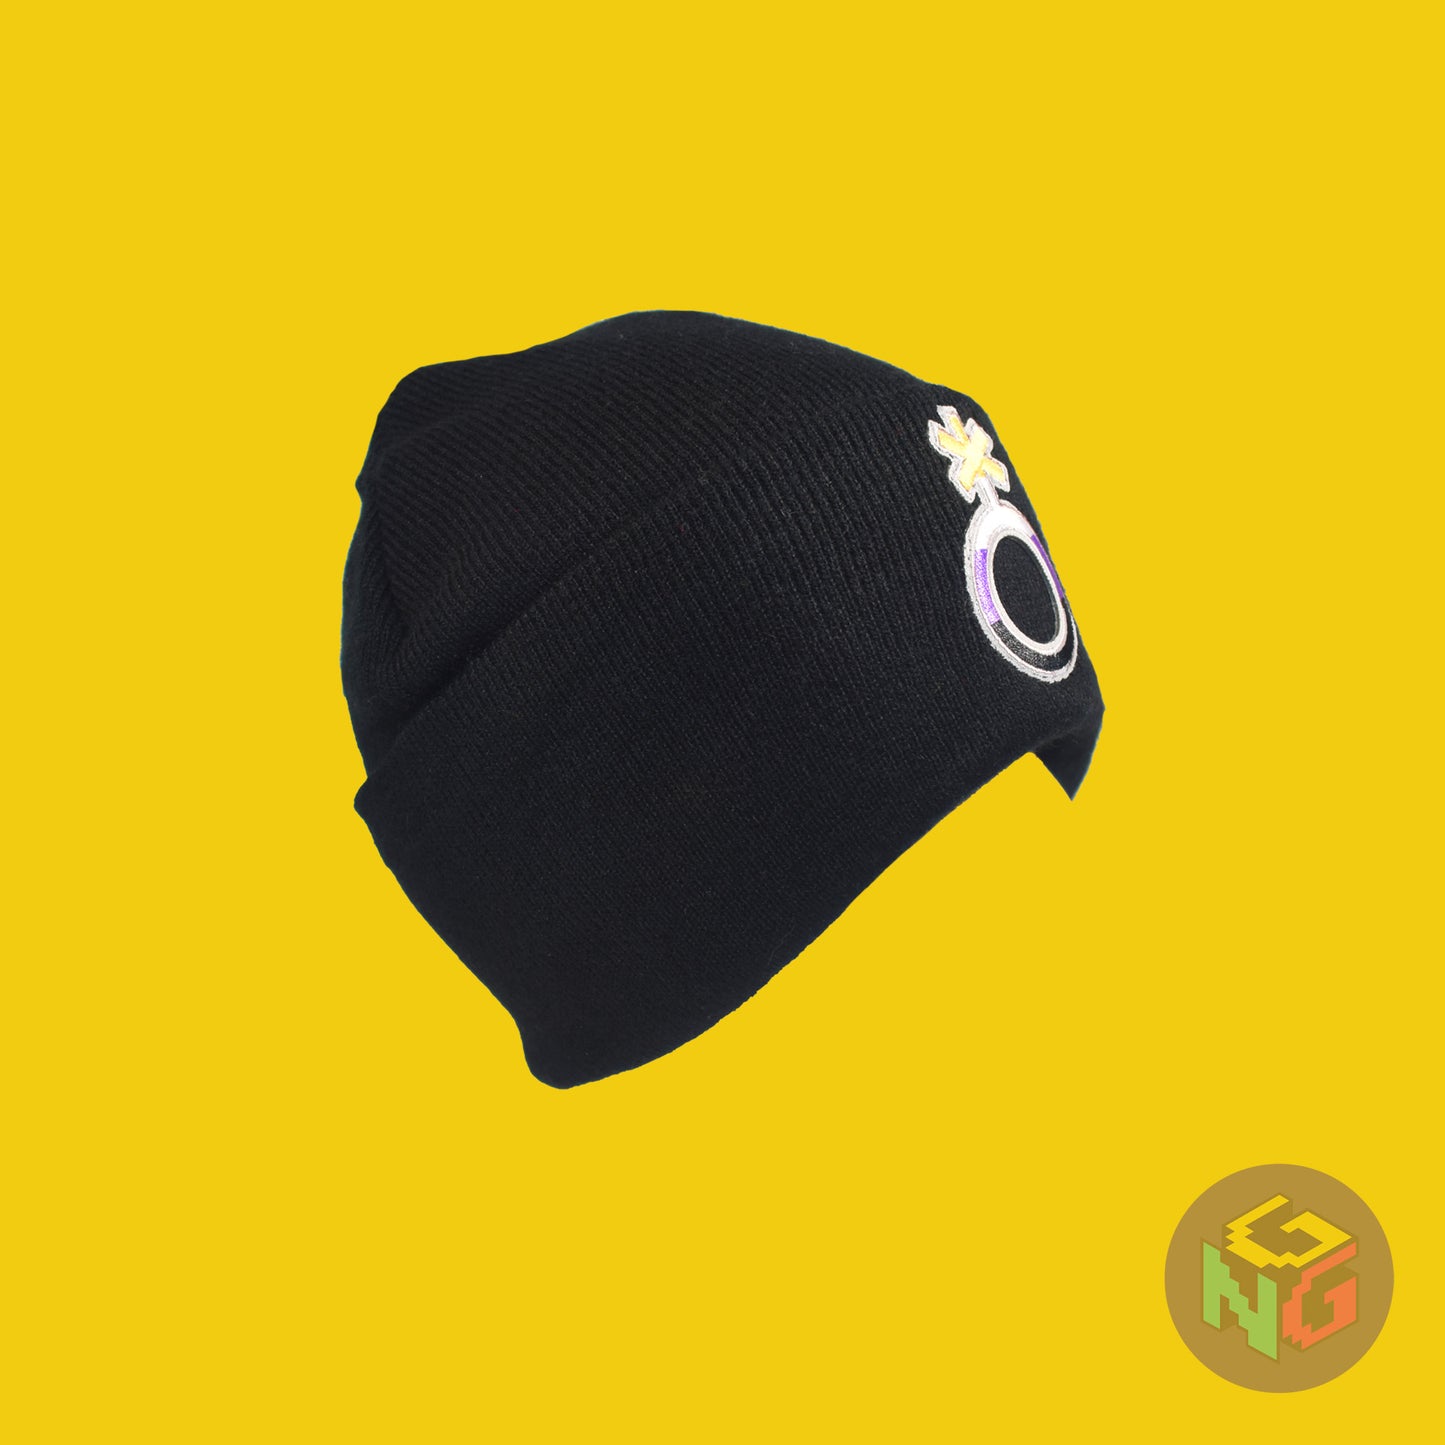 Black knit fabric beanie with the nonbinary symbol in yellow, white, purple, and black on the front. It is stretched and viewed from the side on a yellow background